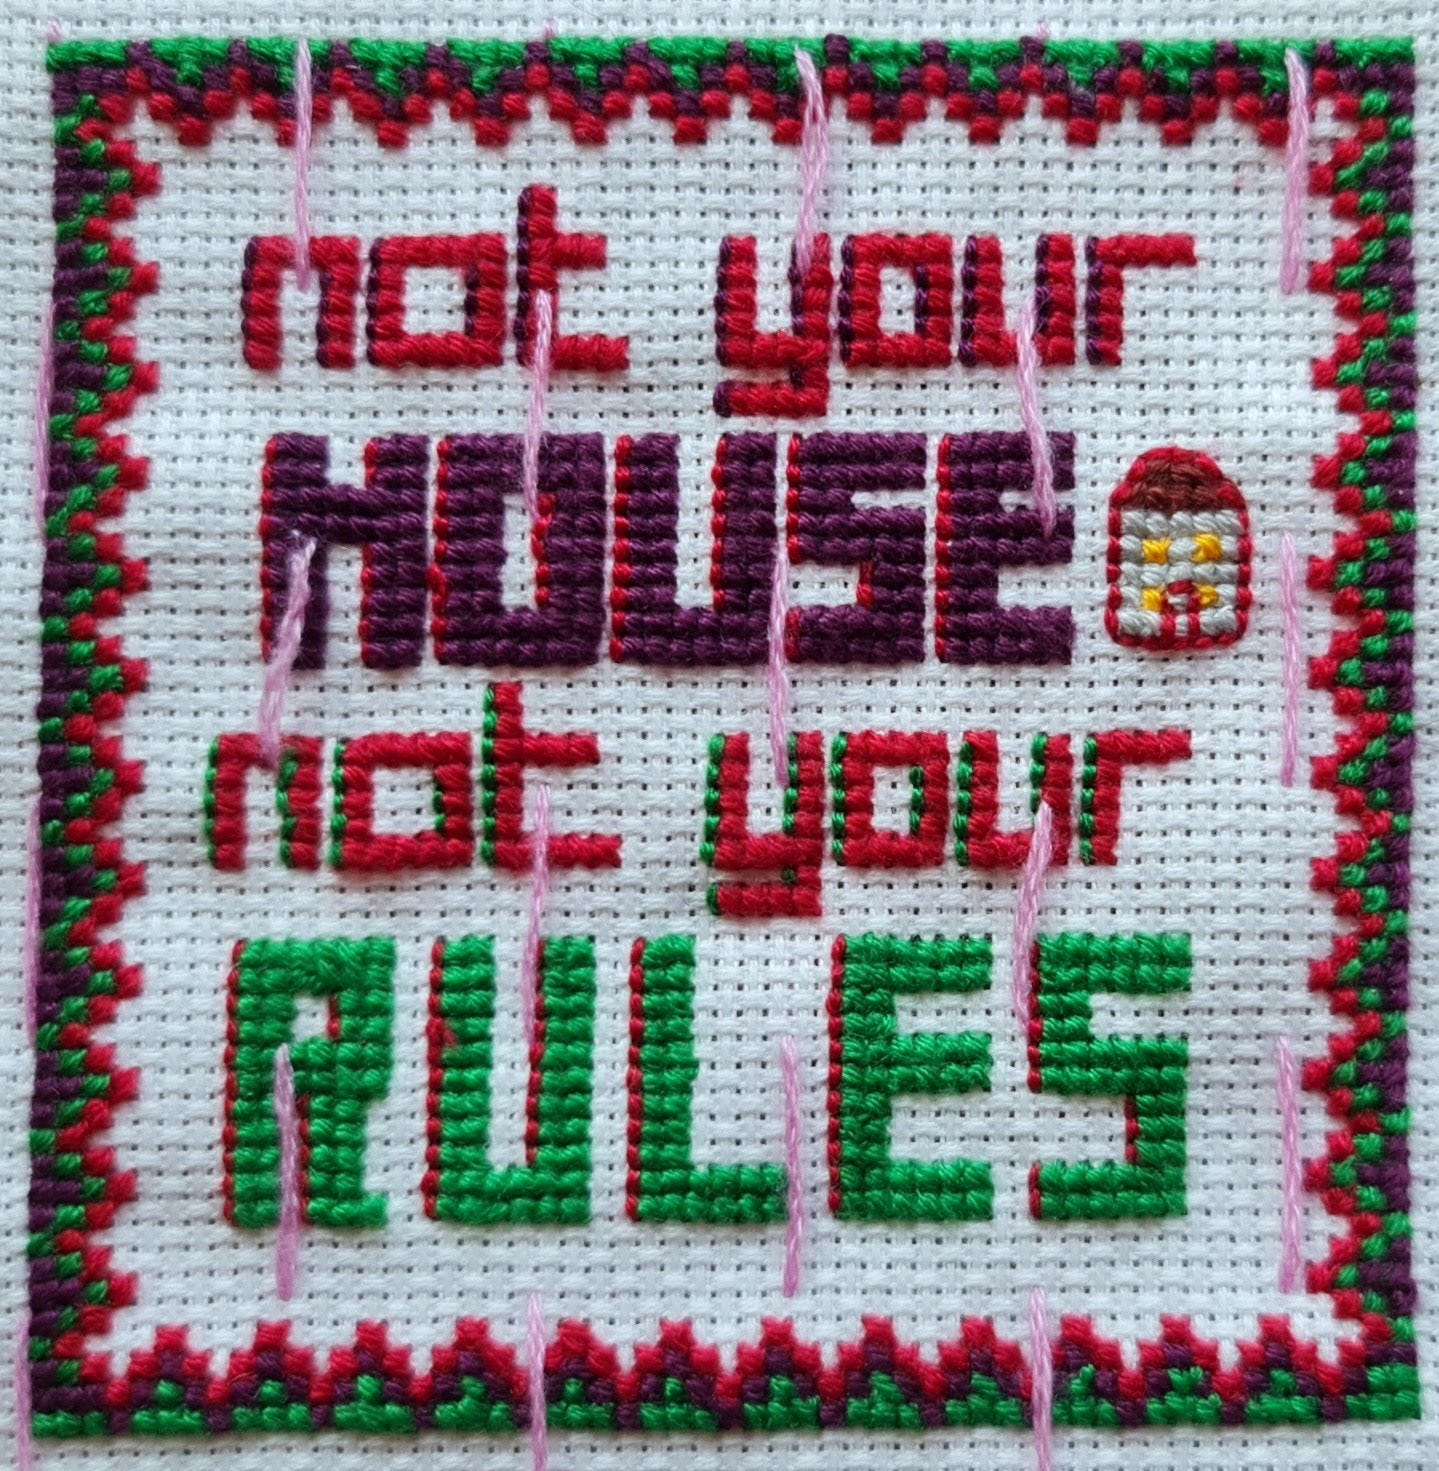 image description: a photograph of a square piece of white cross-stitch fabric with stitches spelling out “not your house not your rules”, a patterned border, and a tiny icon of a house. ‘not your’ is stitched in red with purple highlight edges along the left side of the letters. ‘house’ is stitched in purple with red highlight edges along the left. ‘rules’ is stitched in green with red highlight edges. the square border pattern has a repeated, stepped design, with the left/right edges starting in purple and going through green and red, and the top/bottom starting in green and going through purple and red.